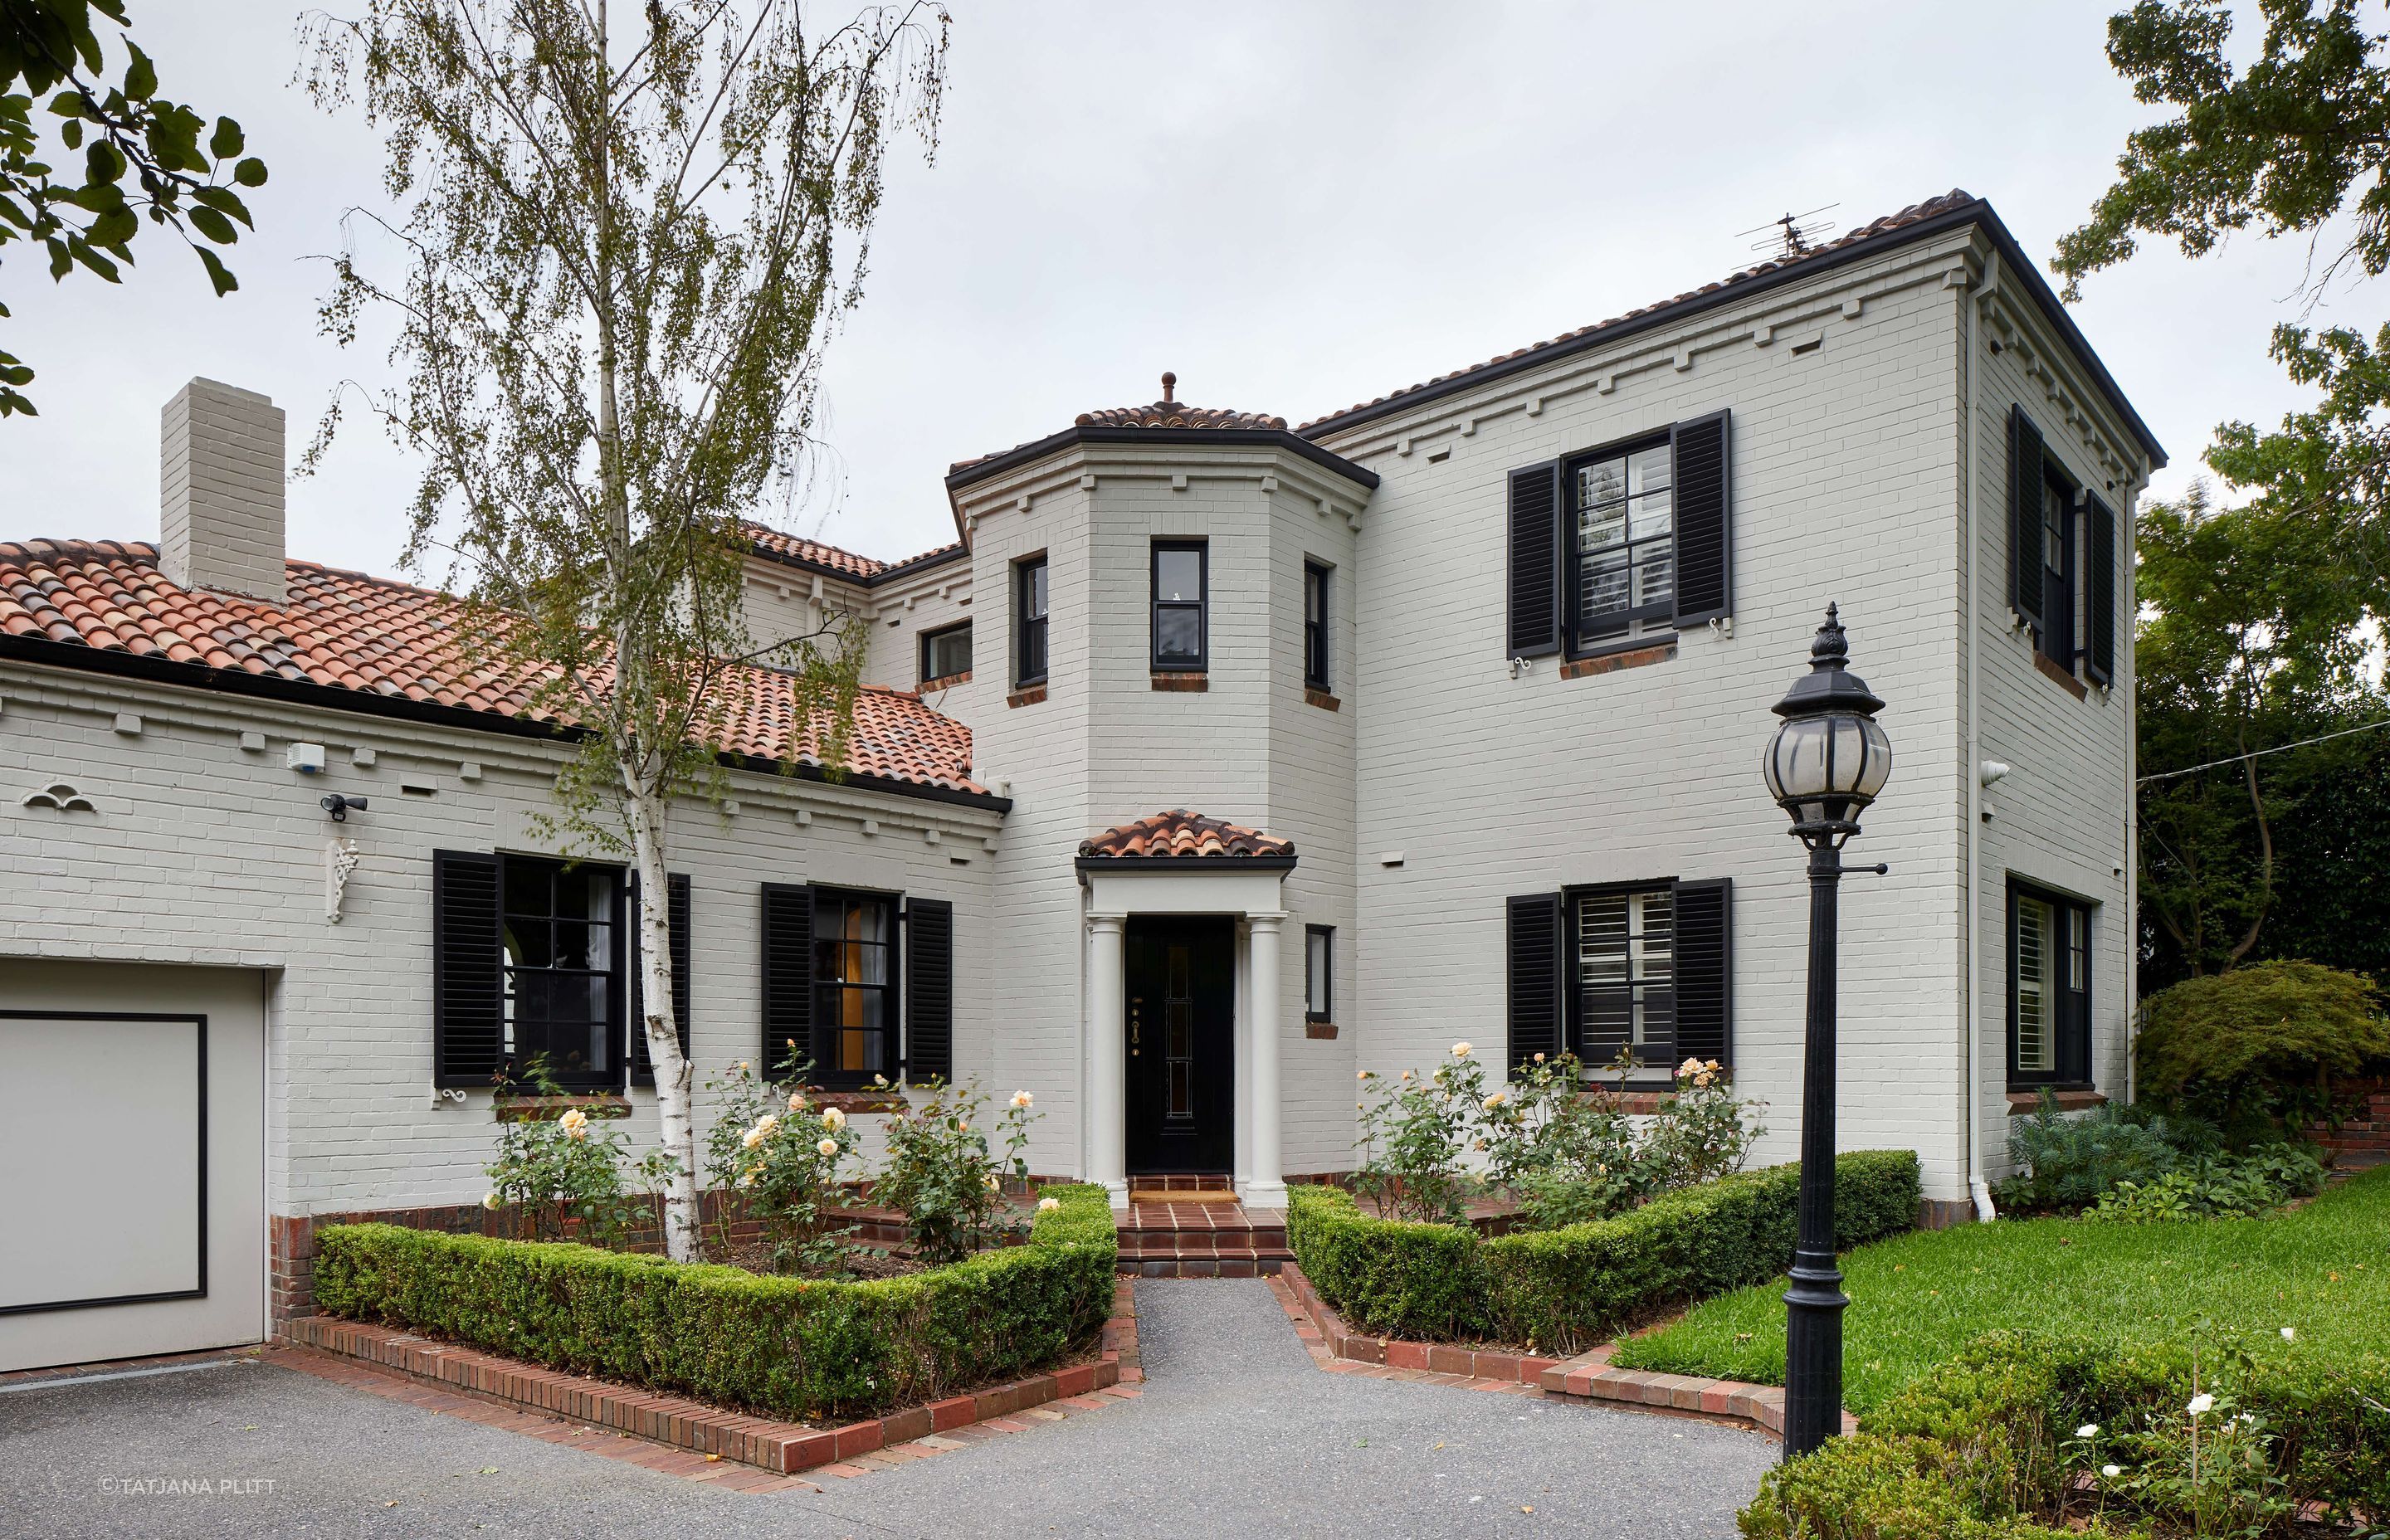 Renovated 1930’s art deco spanish mission style house in Melbourne. Art deco spanish mission house from the 1930’s renovated with updated paint with black shutters. Front of house with formal garden with box hedges and terracotta tiles. See more from our Arch Deco Project.